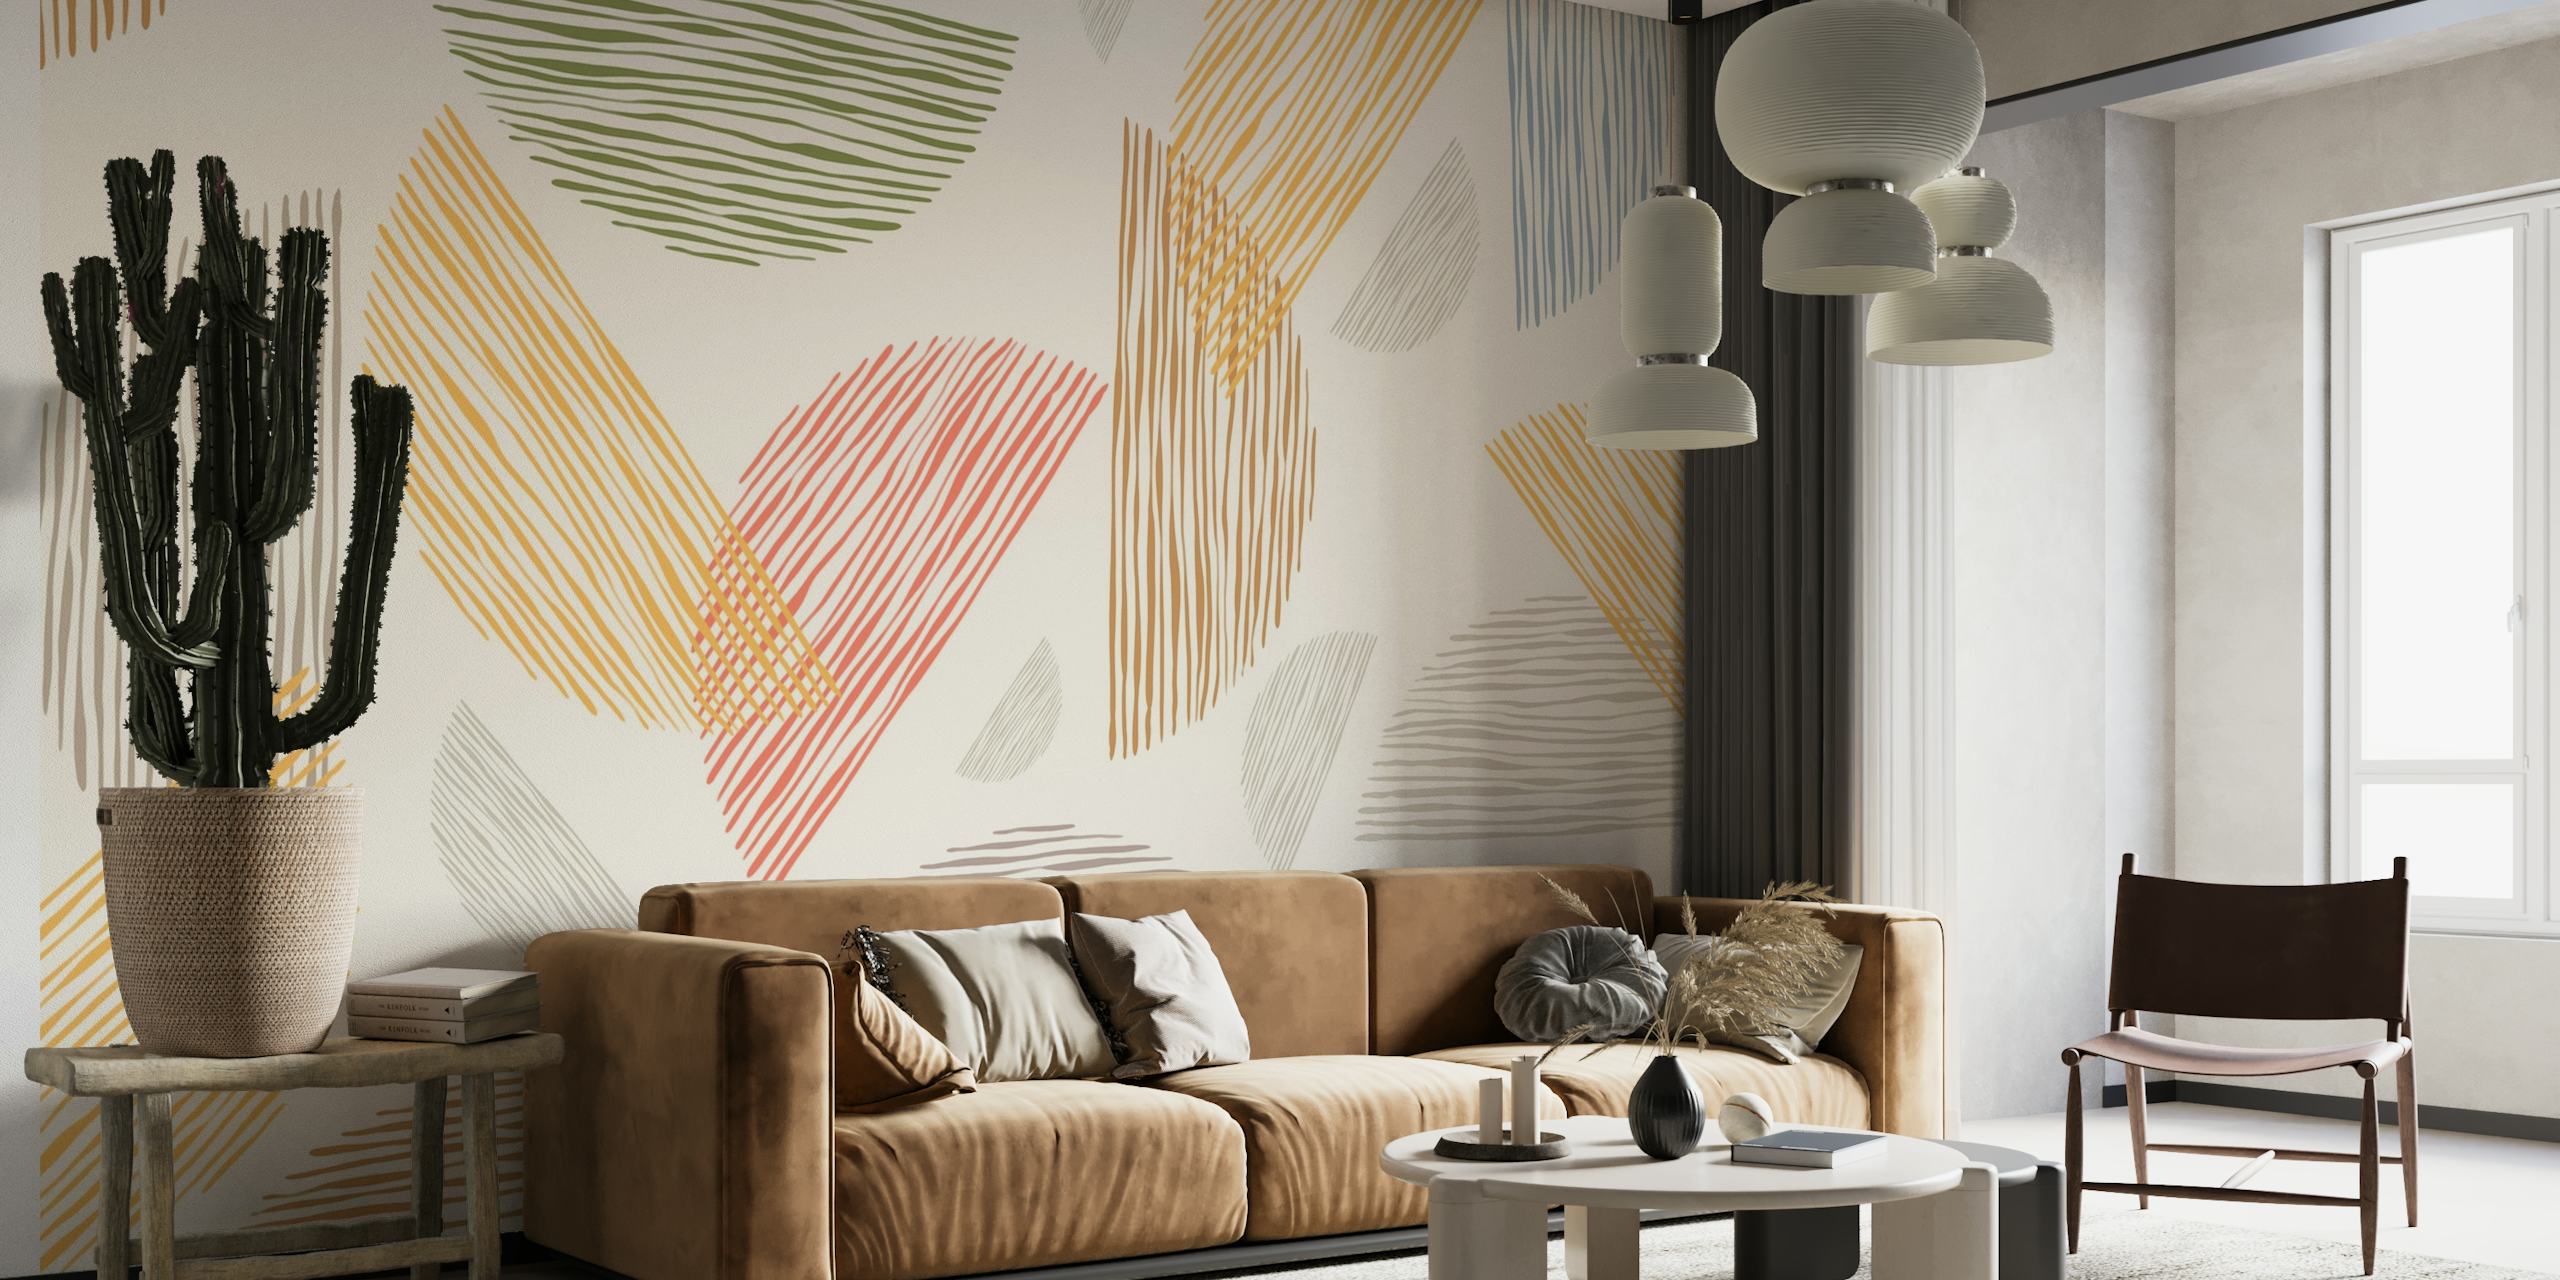 Vintage-inspired geometric striped wall mural in pastel tones